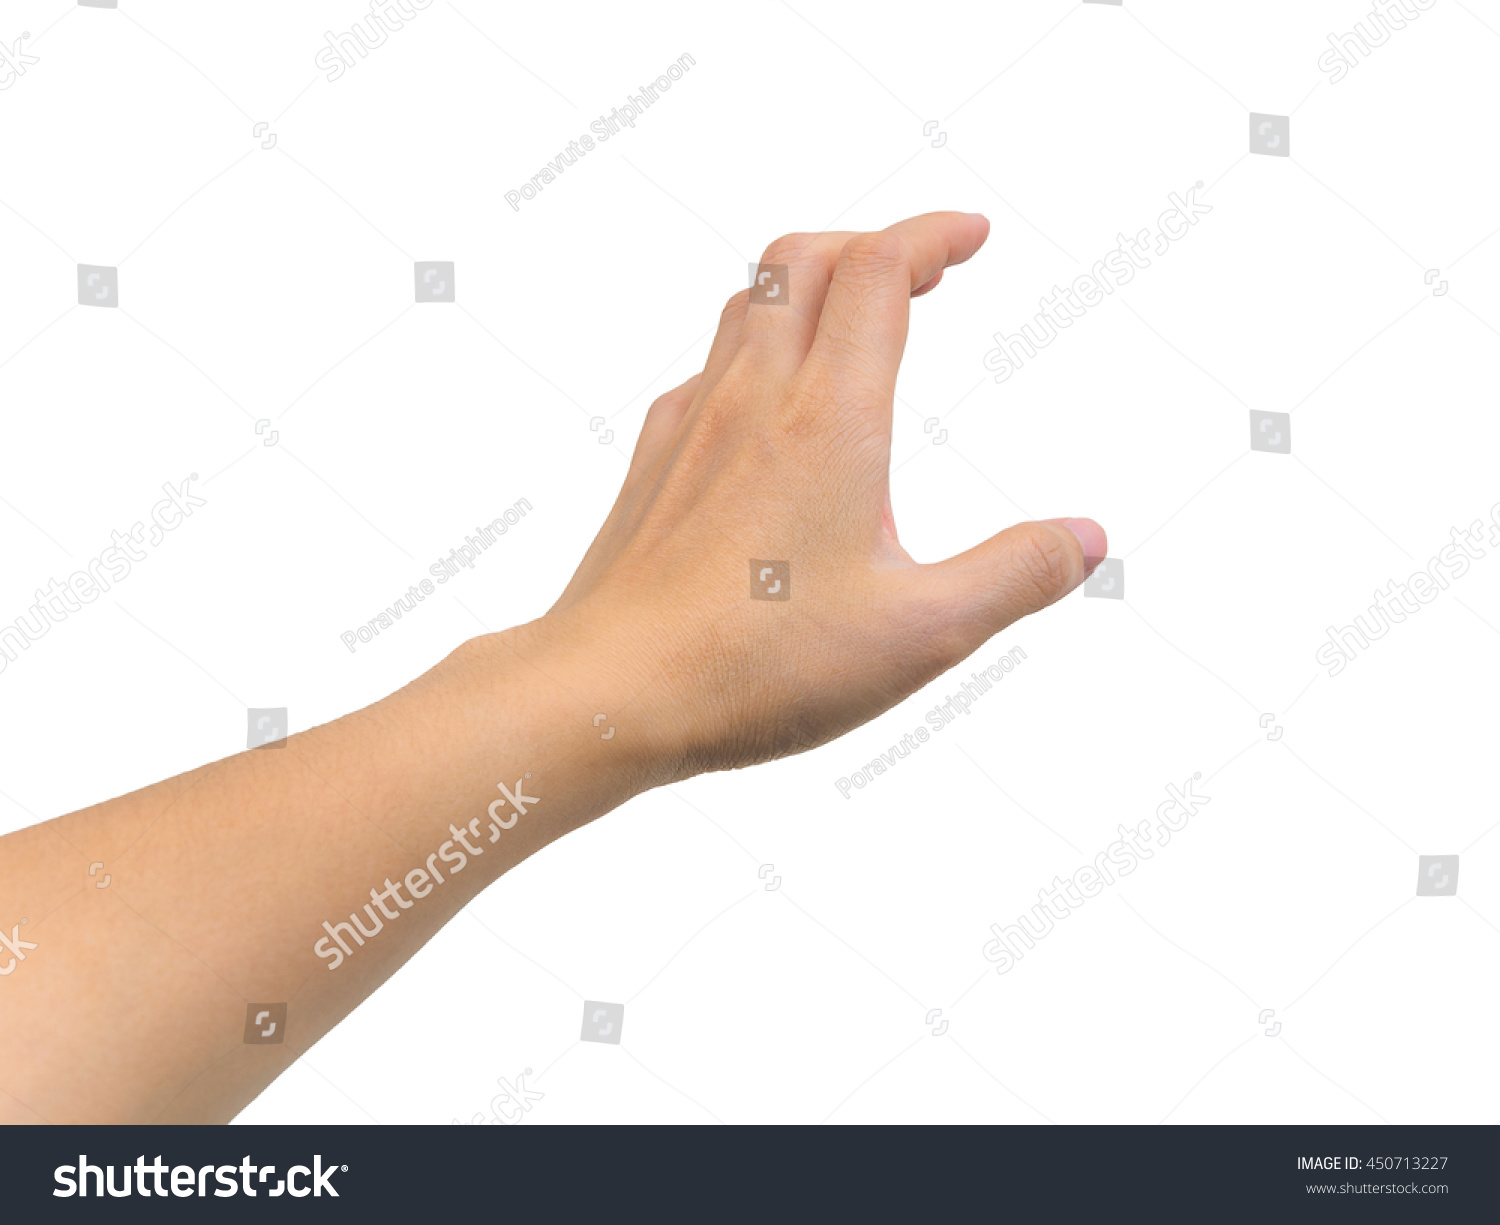 Human hand in picking gesture isolate on white background with clipping path #450713227